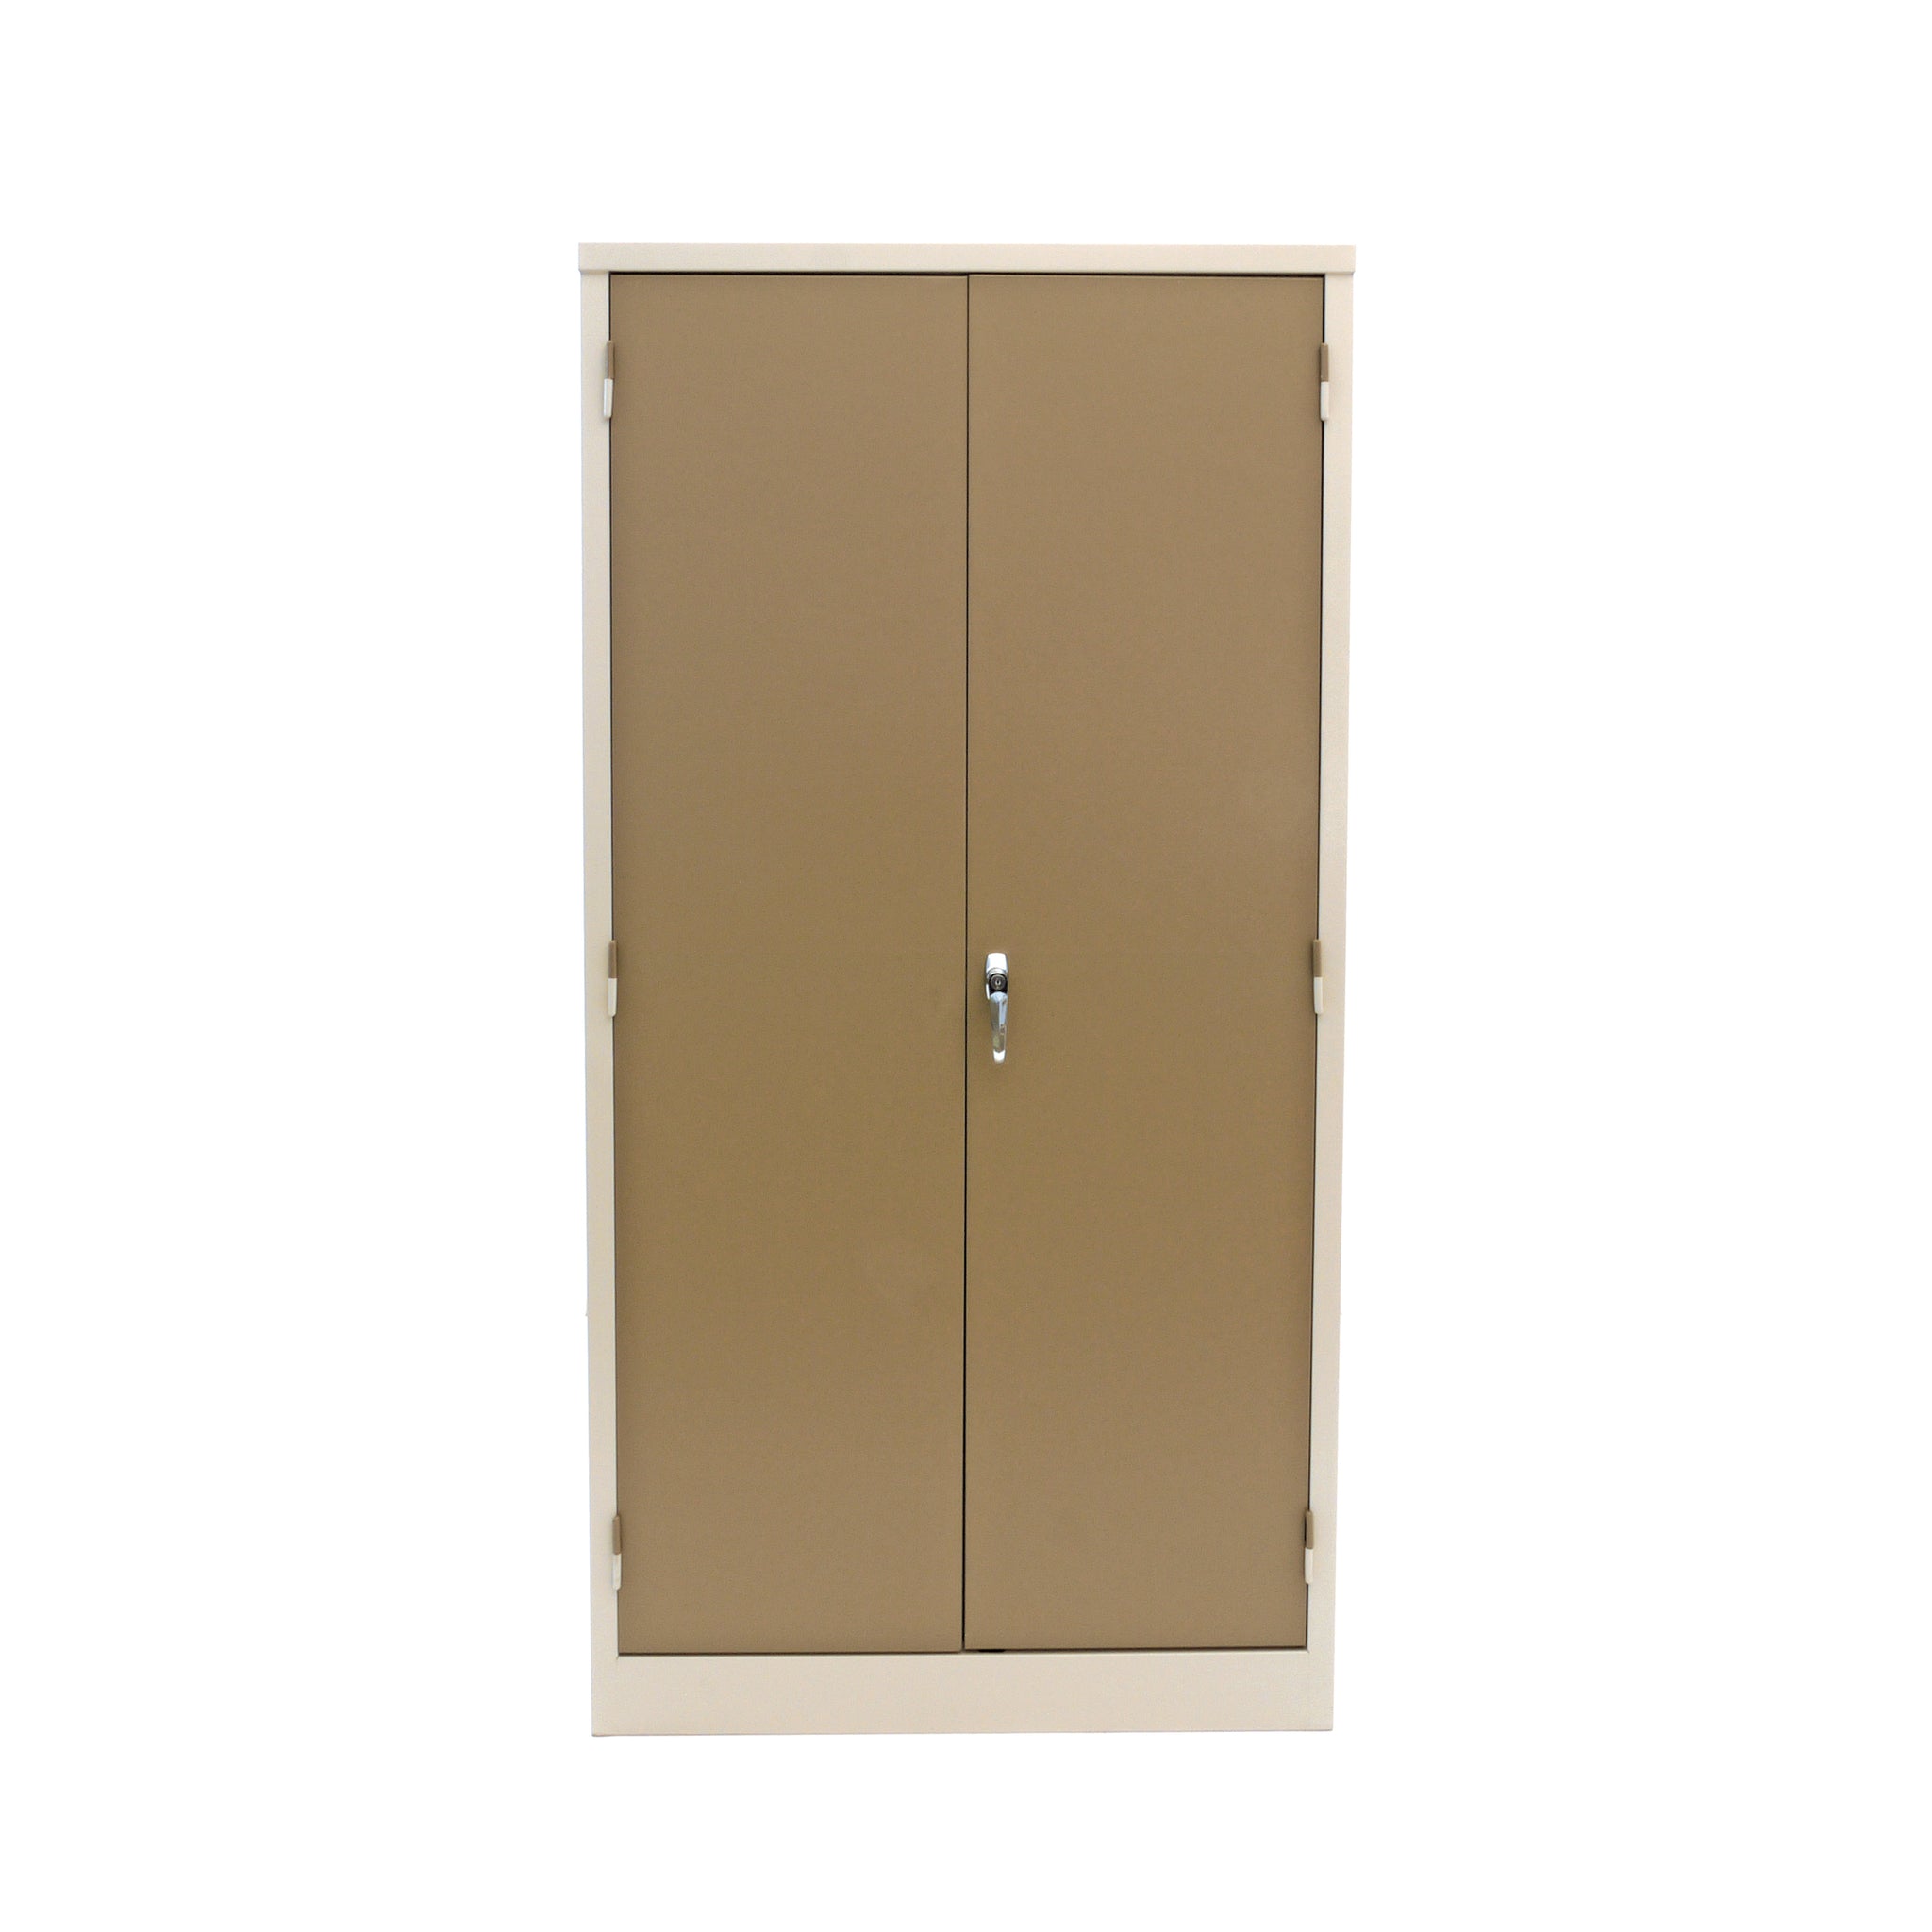 Hedcor stationary cupboards